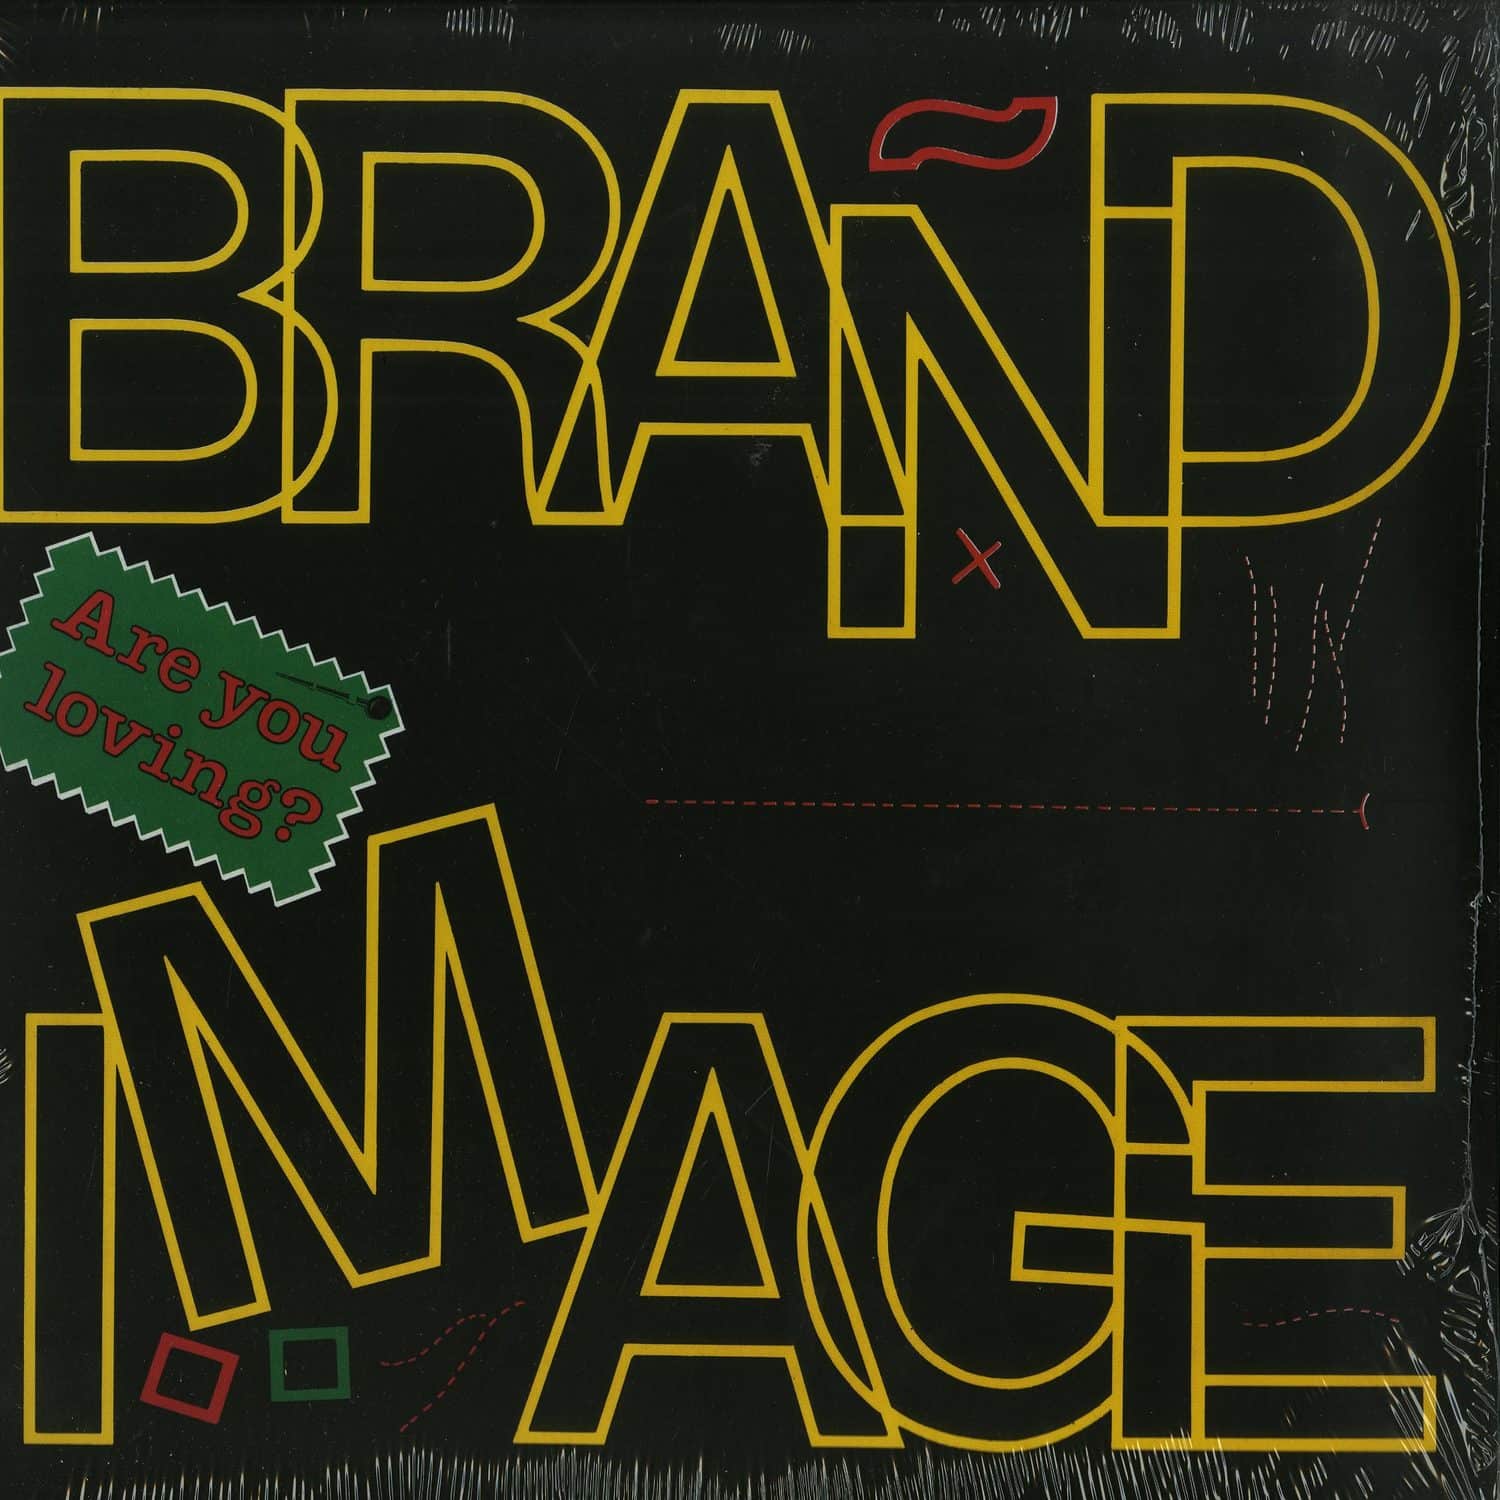 Brand Image - ARE YOU LOVING?